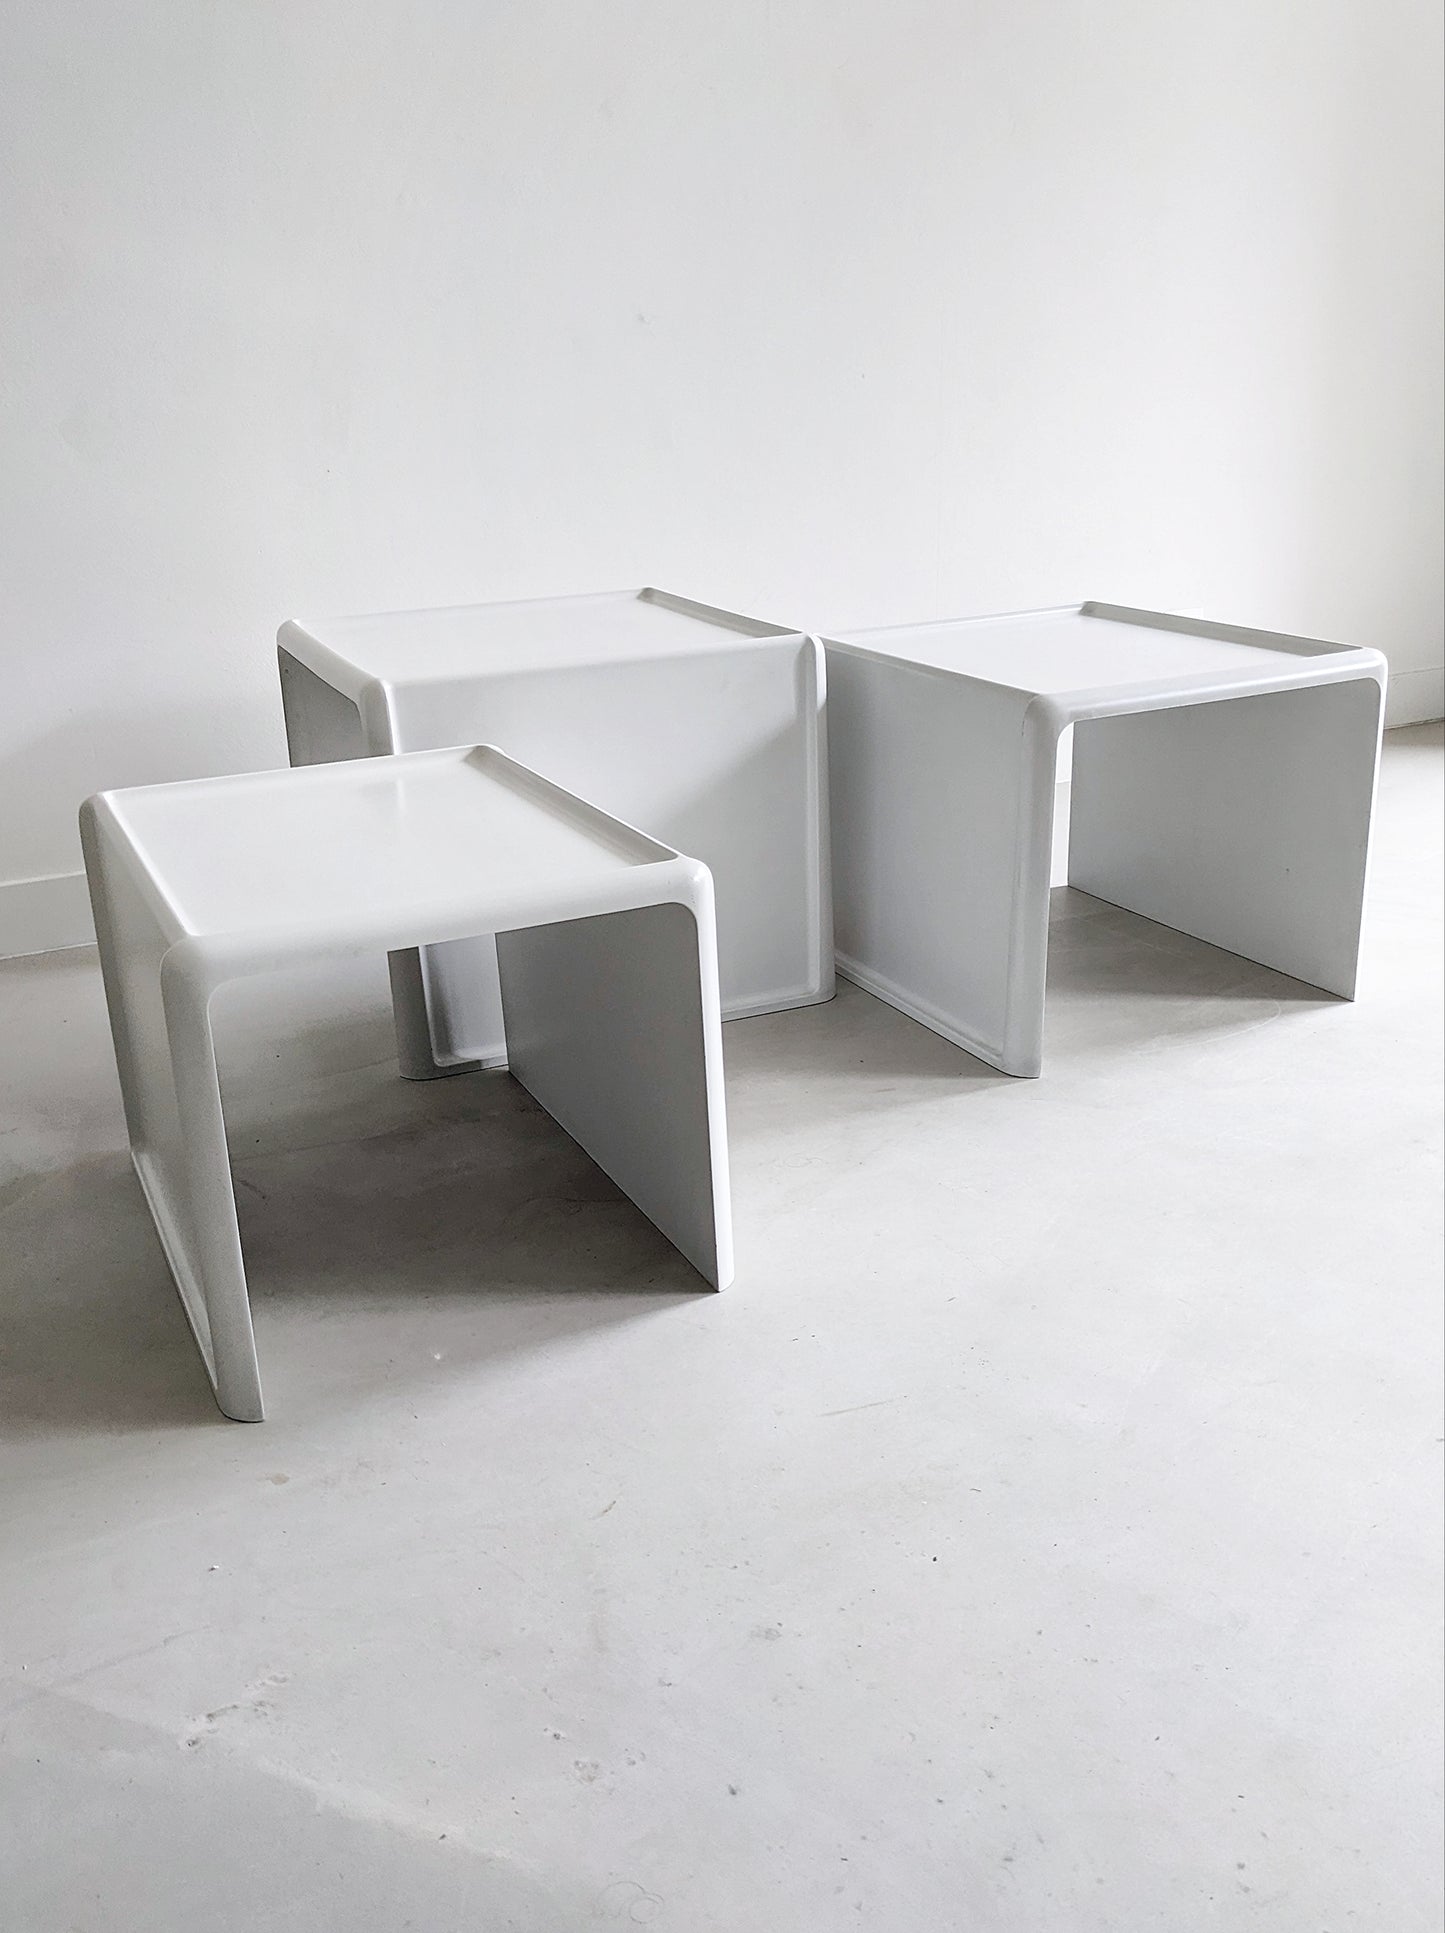 Peter Ghyczy Space Age Nesting Tables 1970's